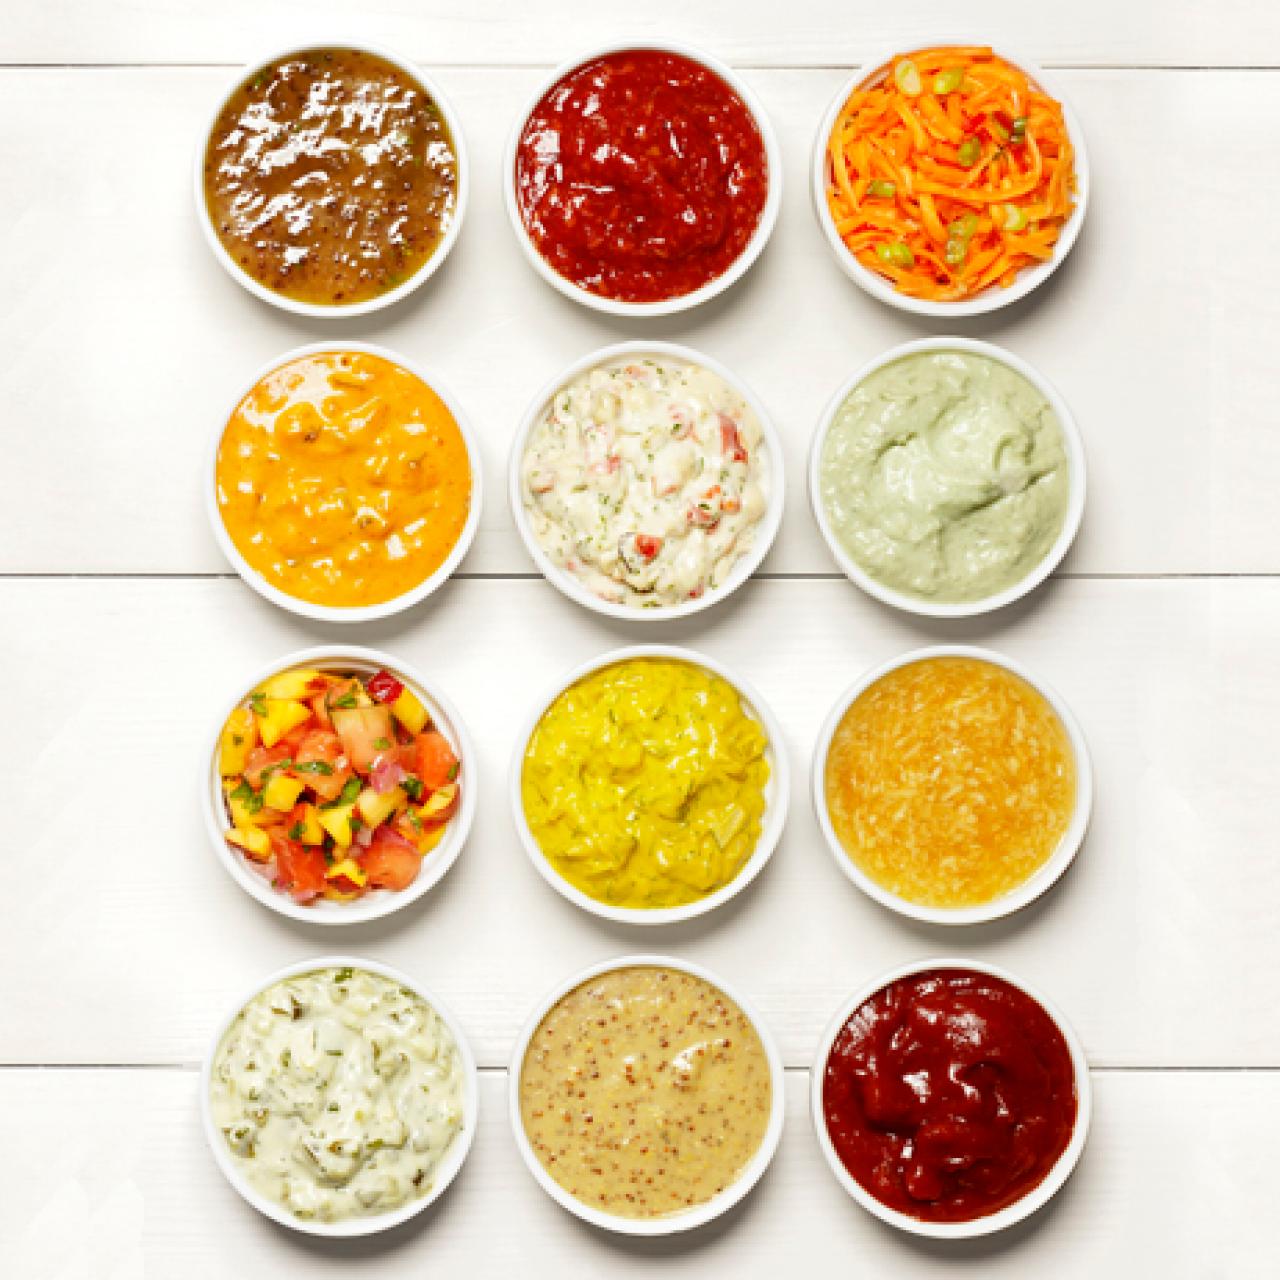 5 Common Types of Mustard and How to Use Them